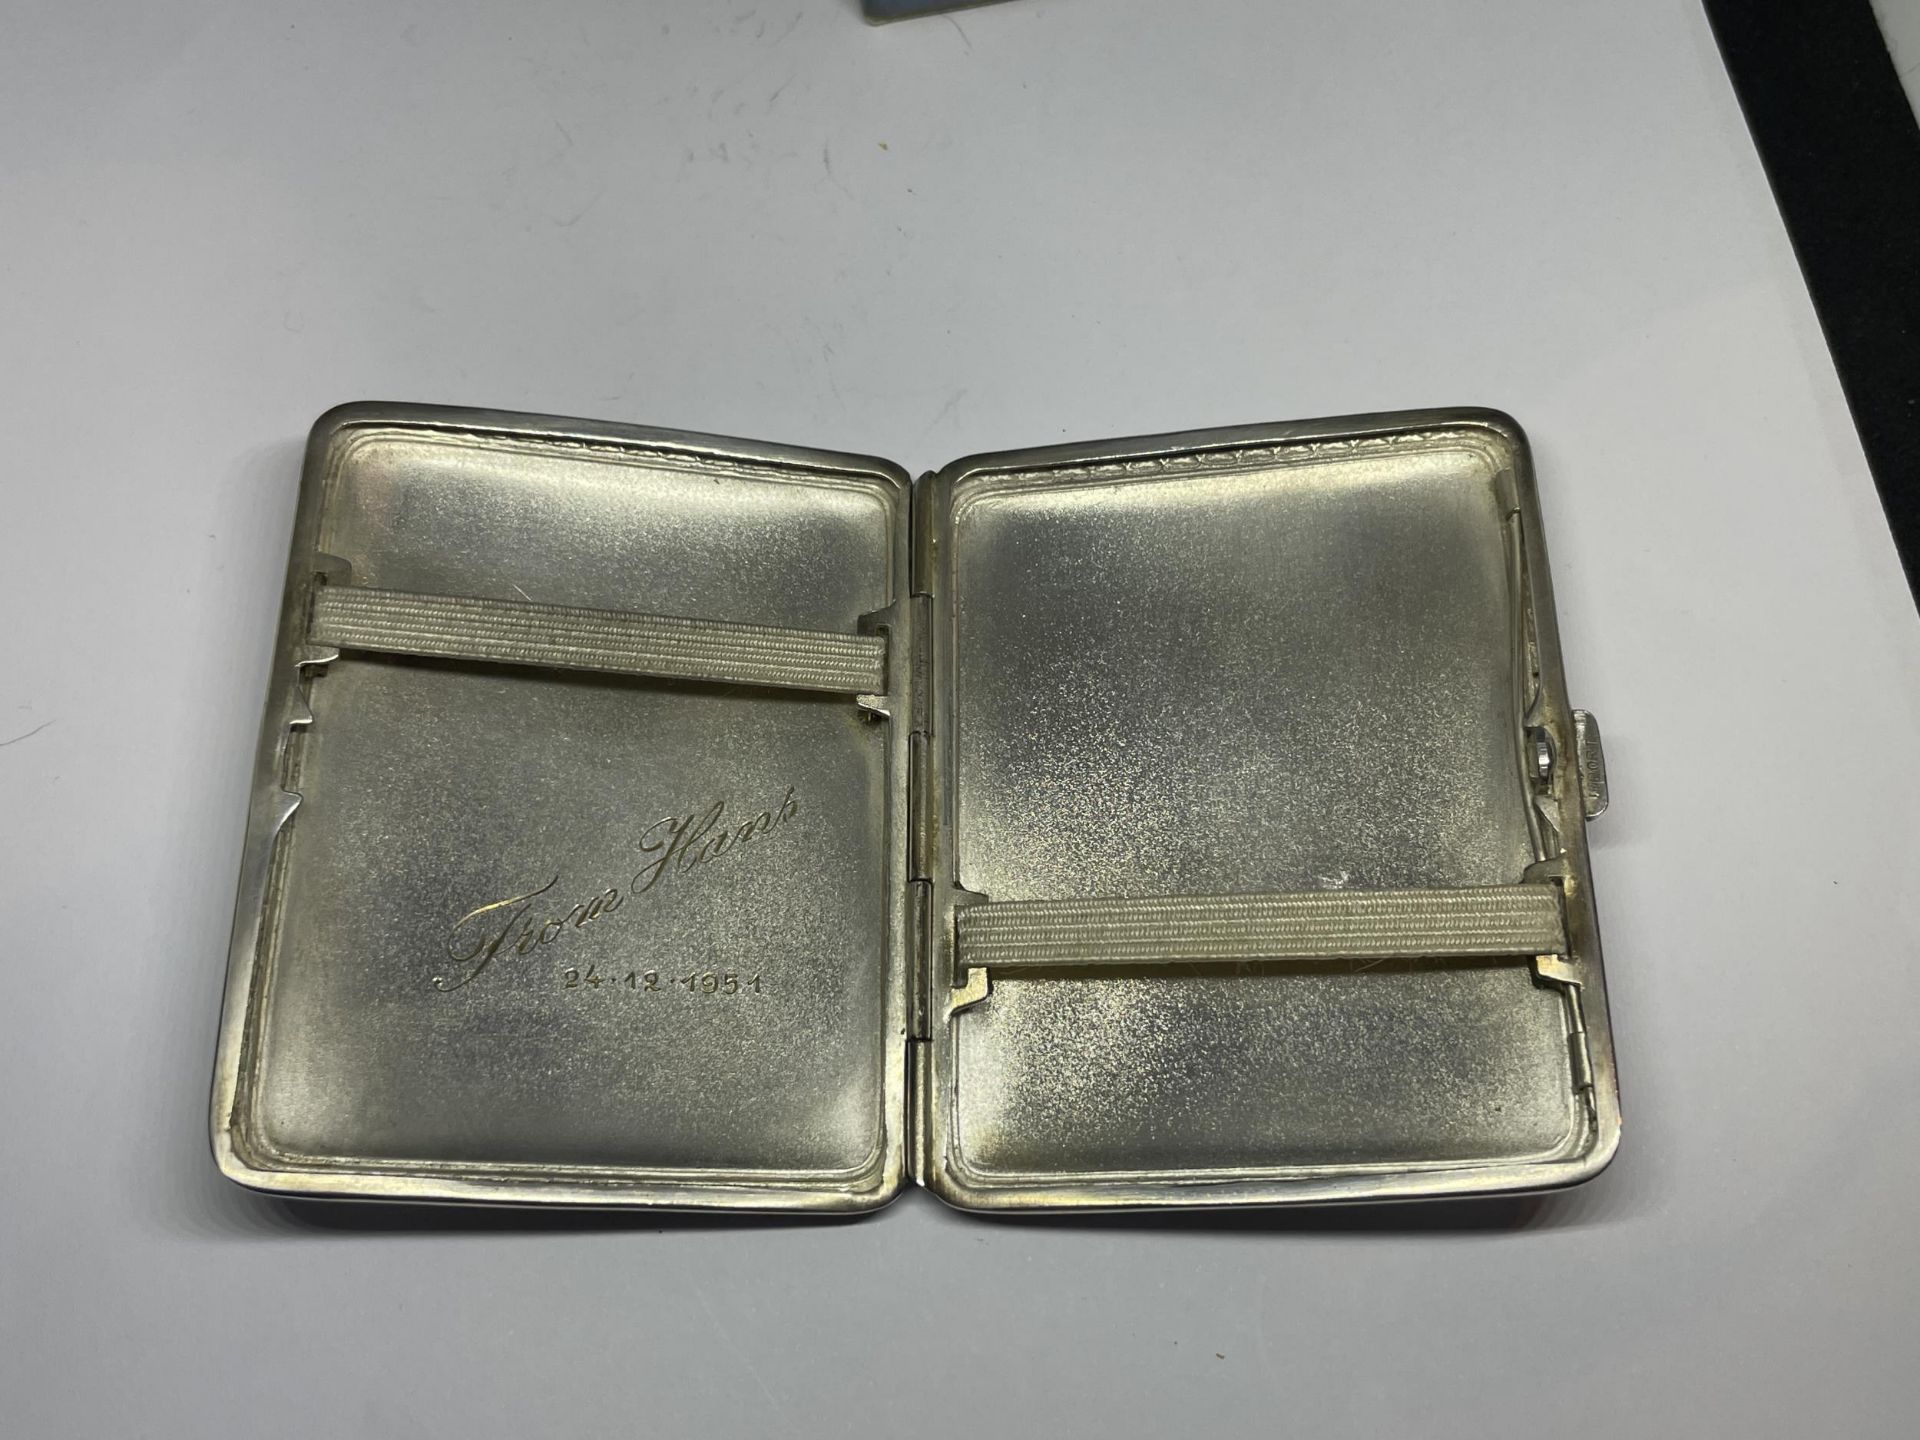 A GERMAN CIGARETTE CASE ENGRAVED MAISIE TO THE FRONT AND FROM HANS 24.12.1951 - Image 3 of 5